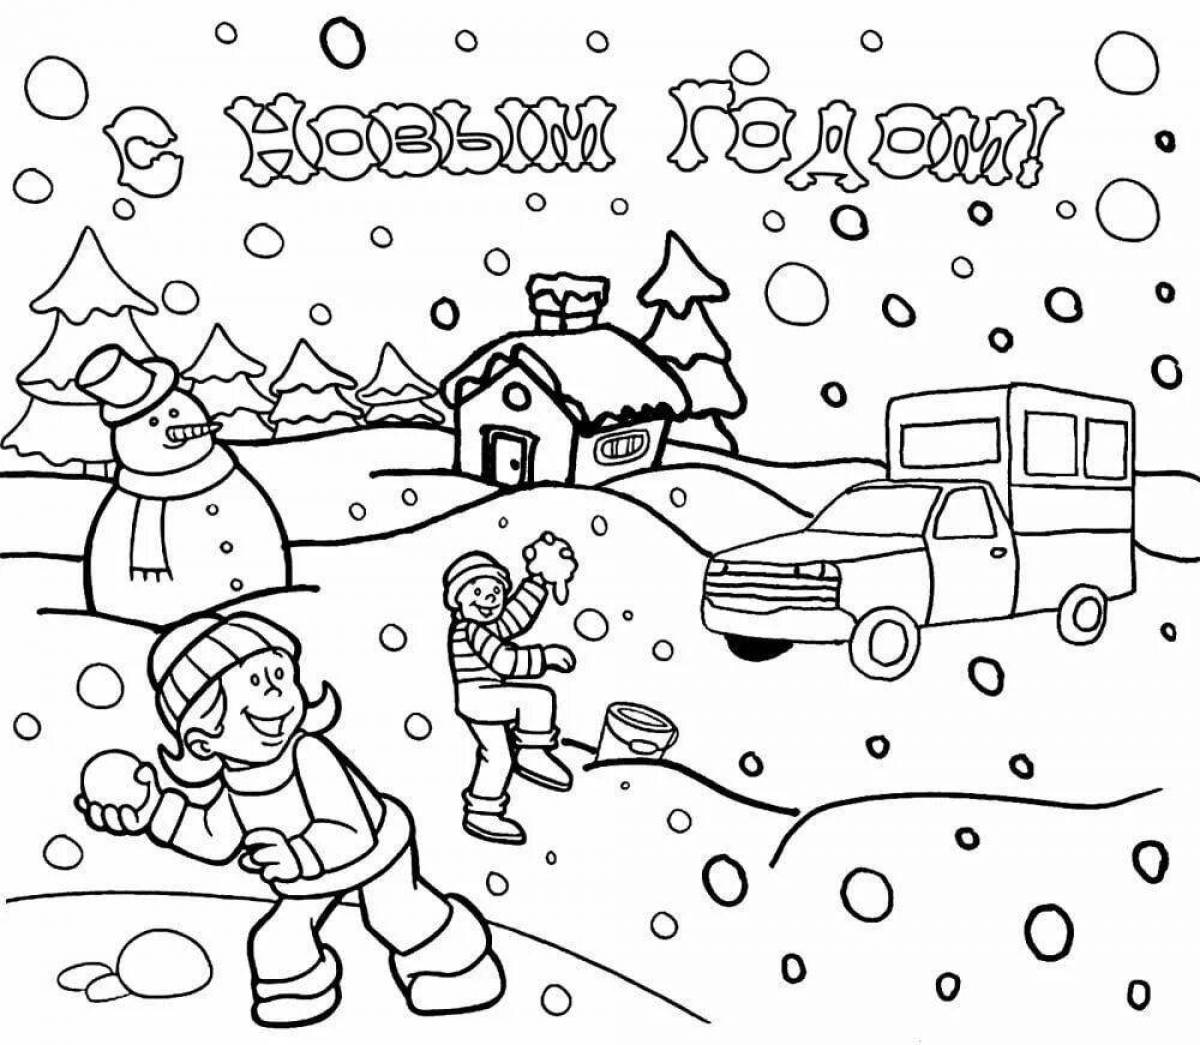 Dreamy winter coloring for children 6-7 years old